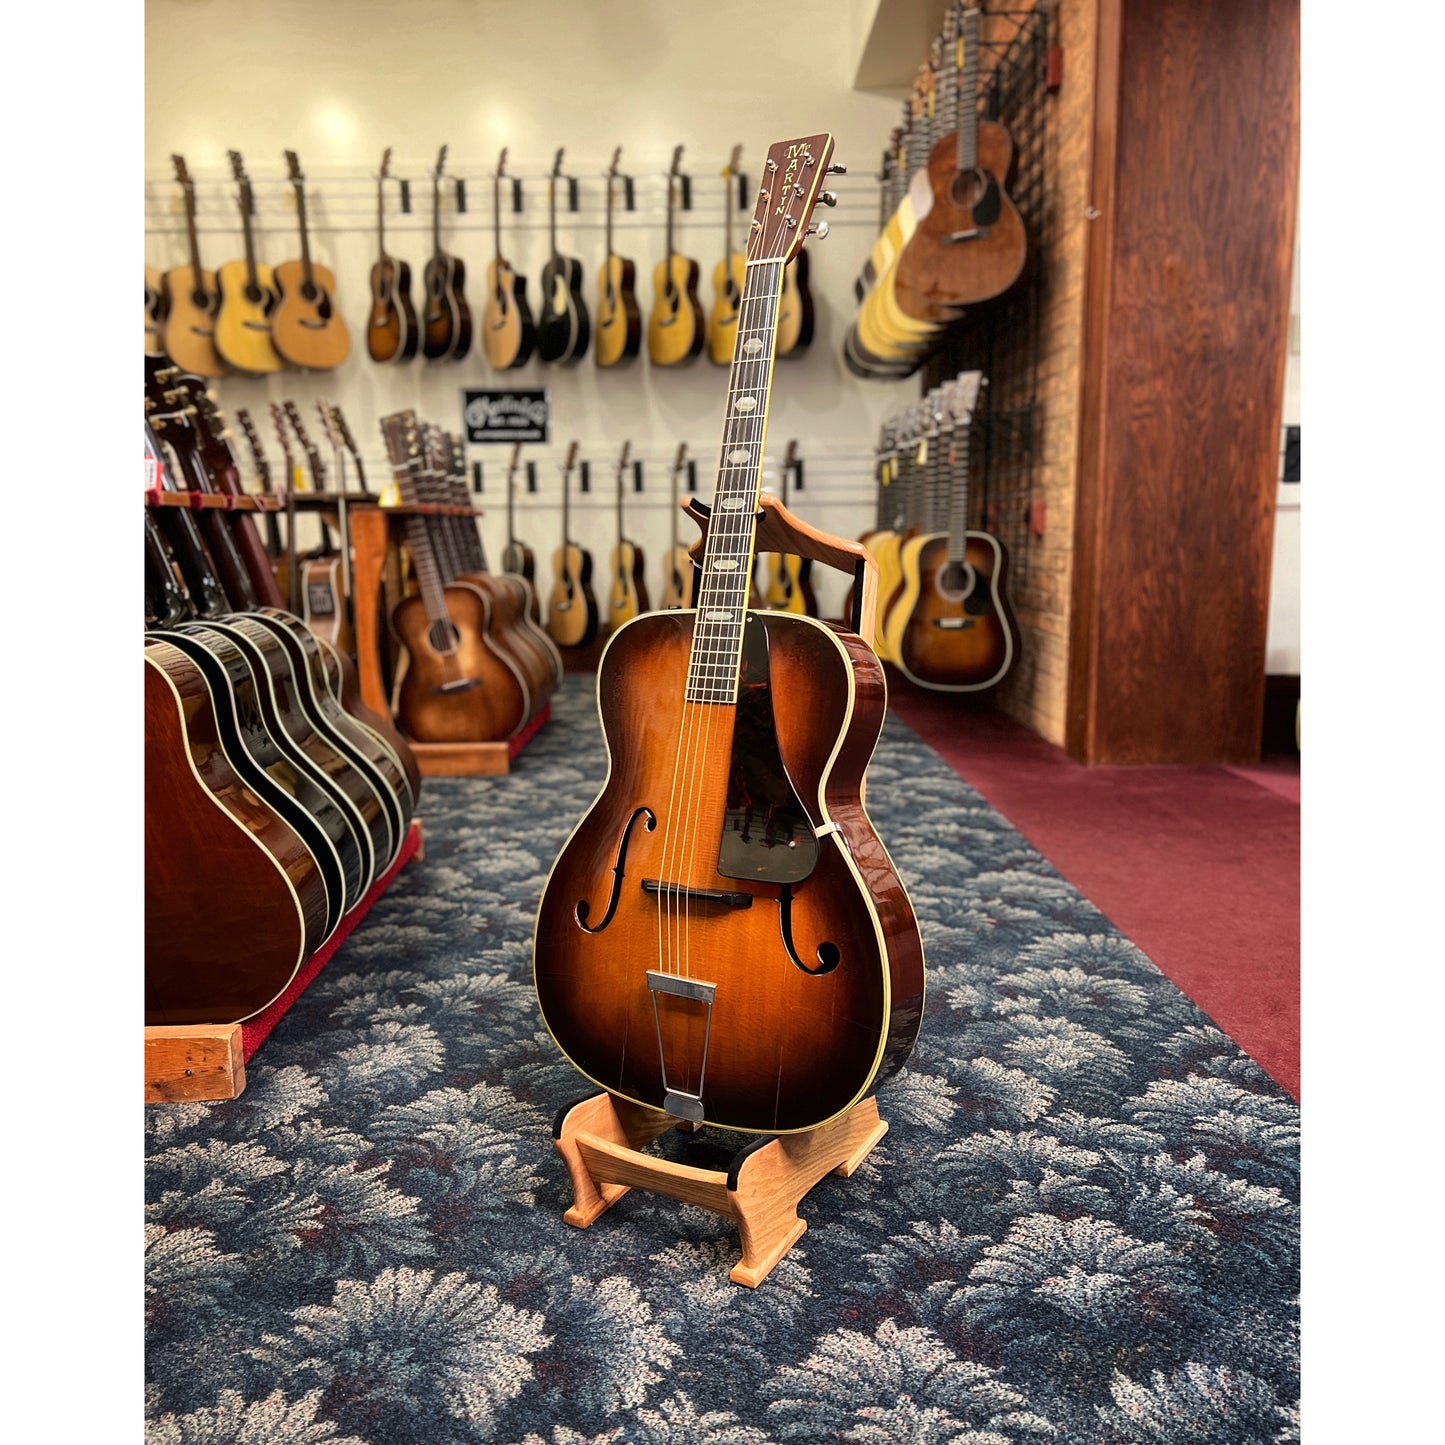 Martin F-7 Archtop Guitar (1941)